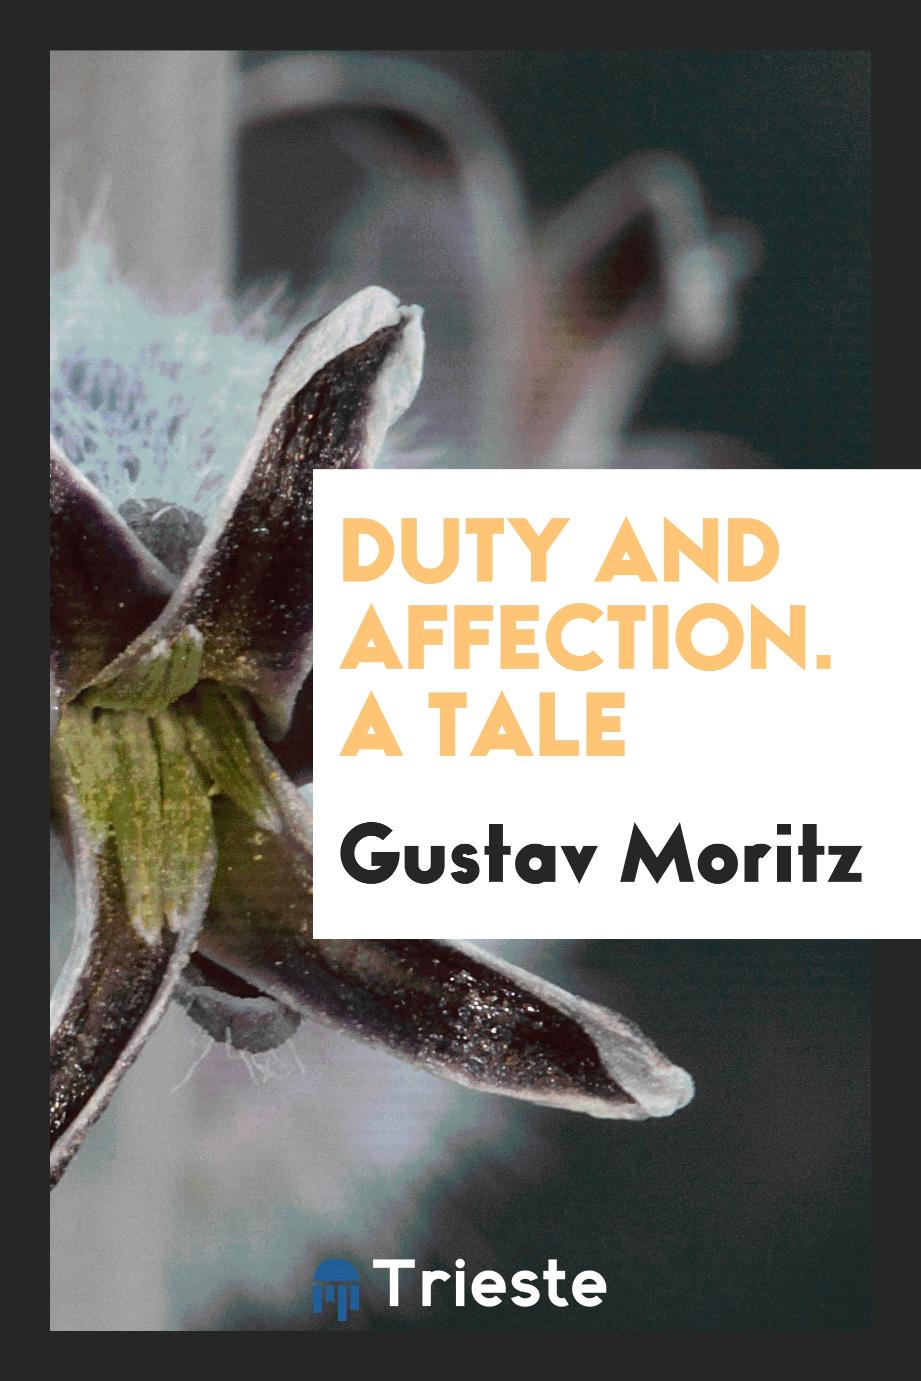 Gustav Moritz - Duty and Affection. A Tale